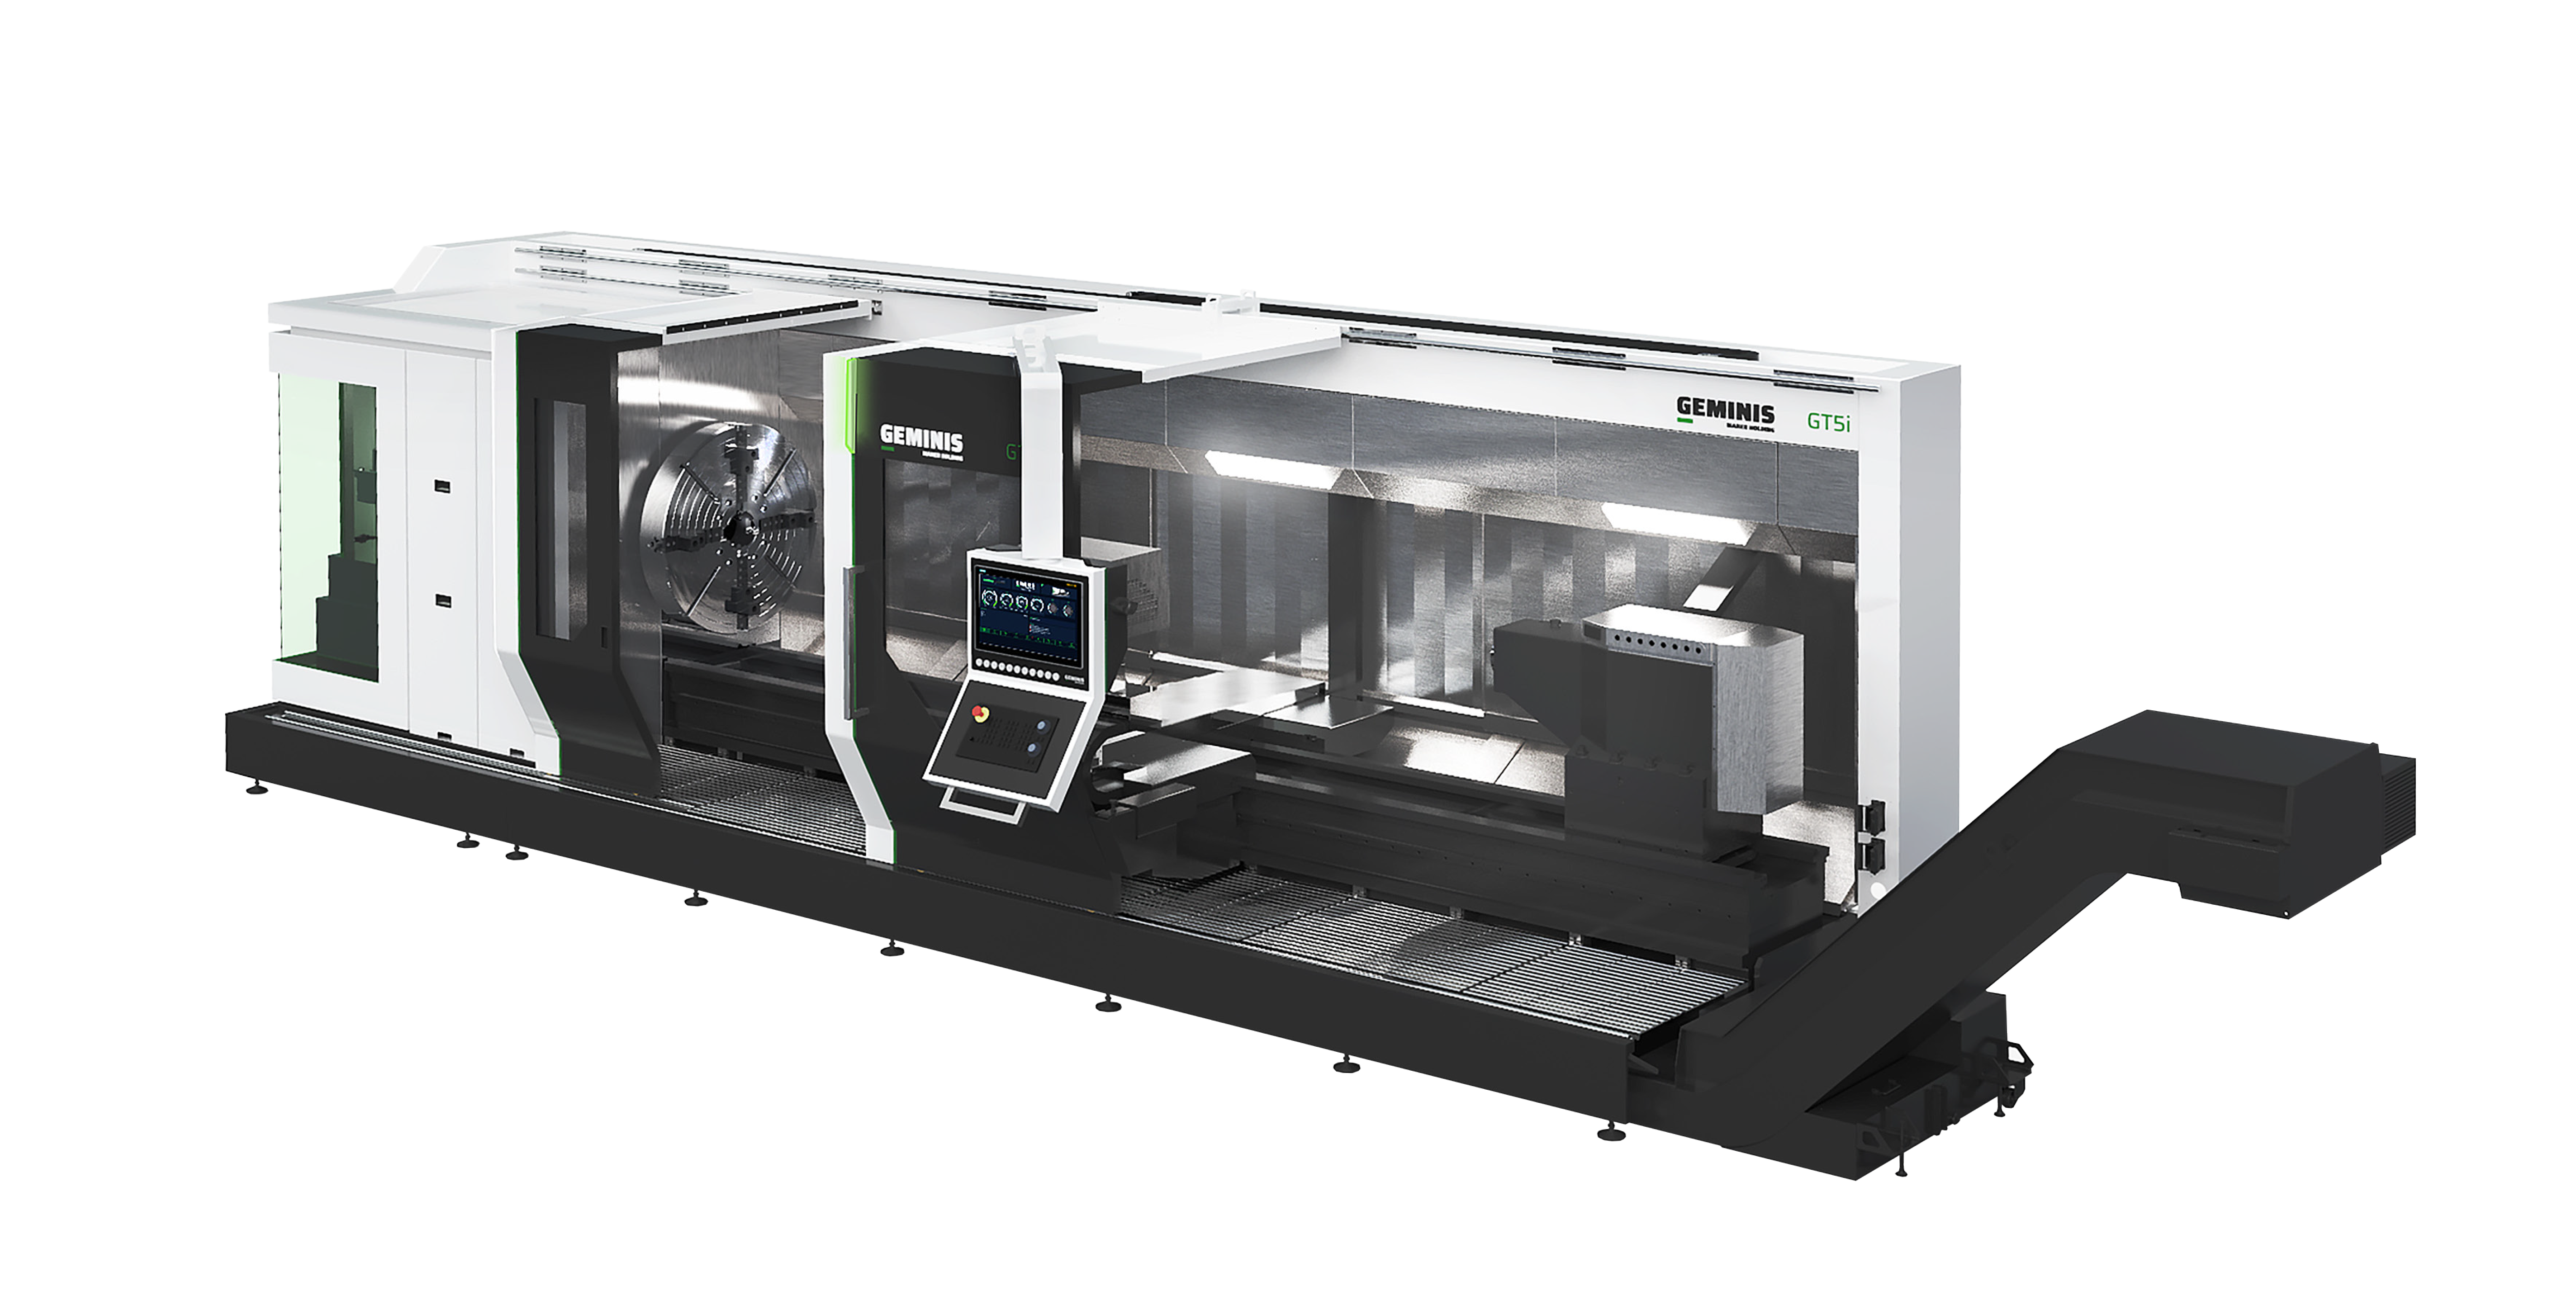 Geminis GT5i CNC Lathe with Flat Bed design and multitasking capabilities